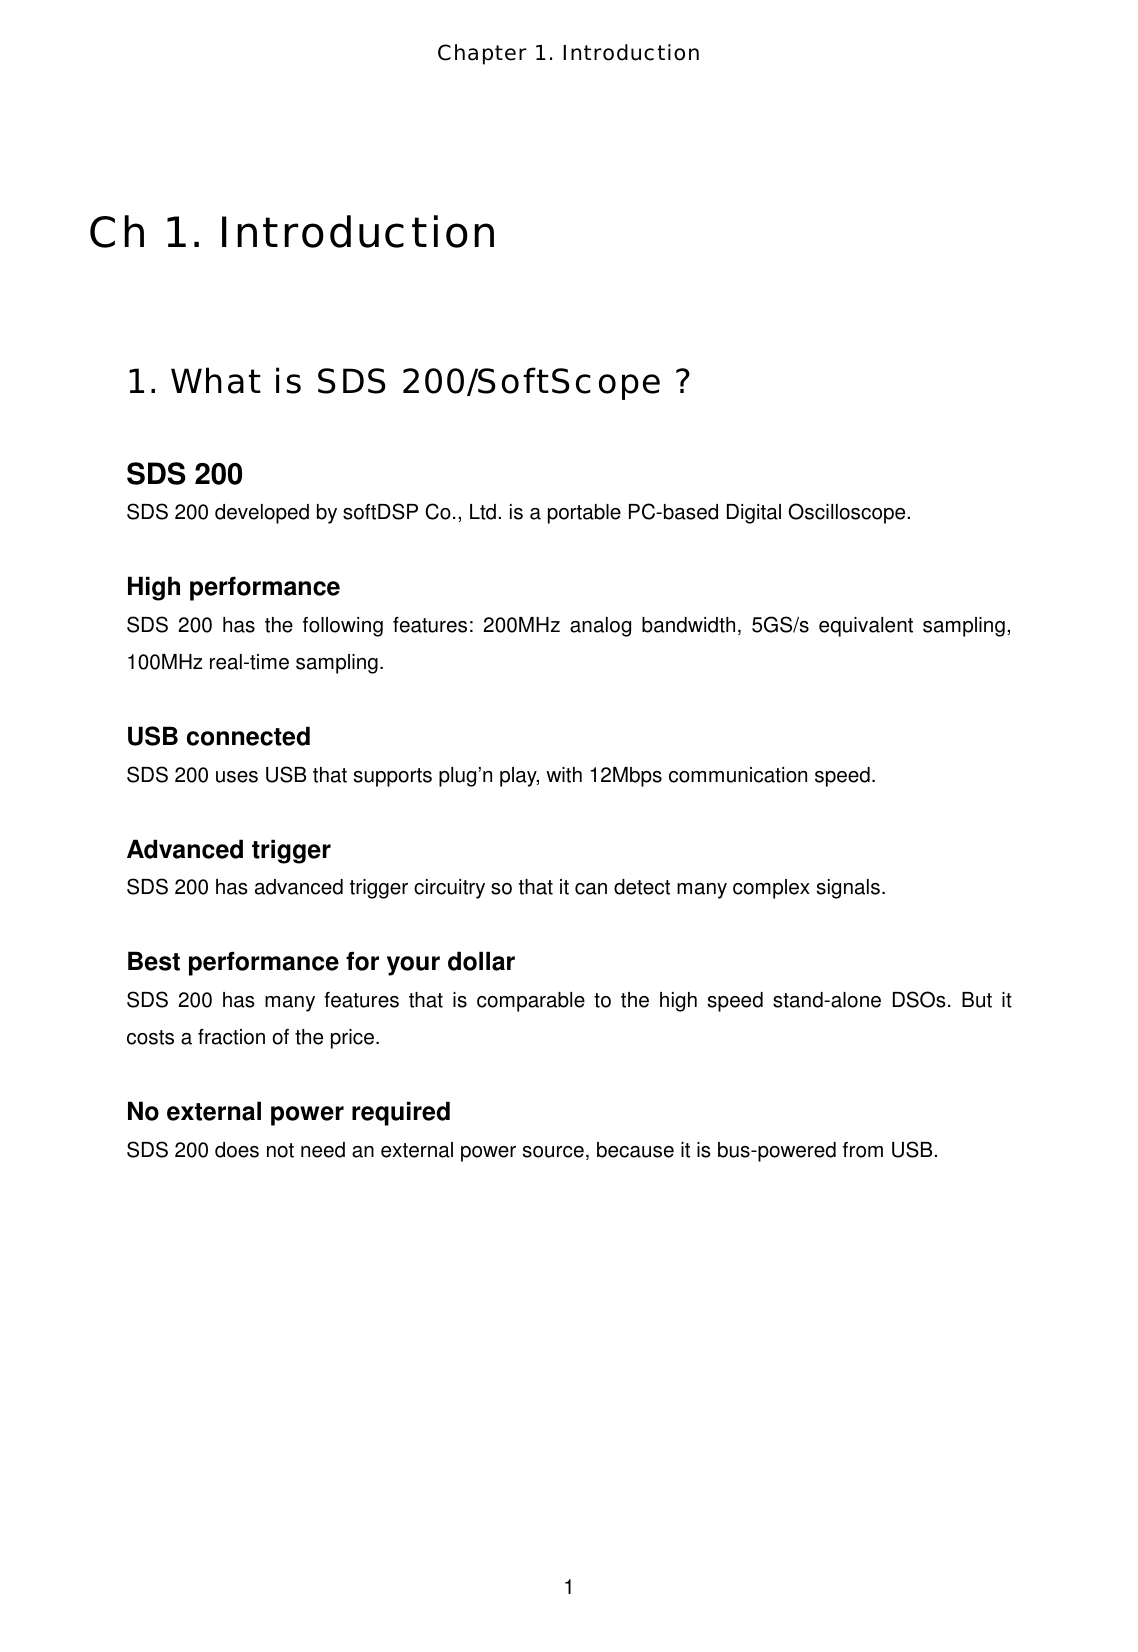 Chapter 1. Introduction  1  Ch 1. Introduction  1. What is SDS 200/SoftScope ?  SDS 200 SDS 200 developed by softDSP Co., Ltd. is a portable PC-based Digital Oscilloscope.  High performance SDS 200 has the following features: 200MHz analog bandwidth, 5GS/s equivalent sampling, 100MHz real-time sampling.  USB connected SDS 200 uses USB that supports plug’n play, with 12Mbps communication speed.    Advanced trigger SDS 200 has advanced trigger circuitry so that it can detect many complex signals.  Best performance for your dollar SDS 200 has many features that is comparable to the high speed stand-alone DSOs. But it costs a fraction of the price.  No external power required SDS 200 does not need an external power source, because it is bus-powered from USB.    